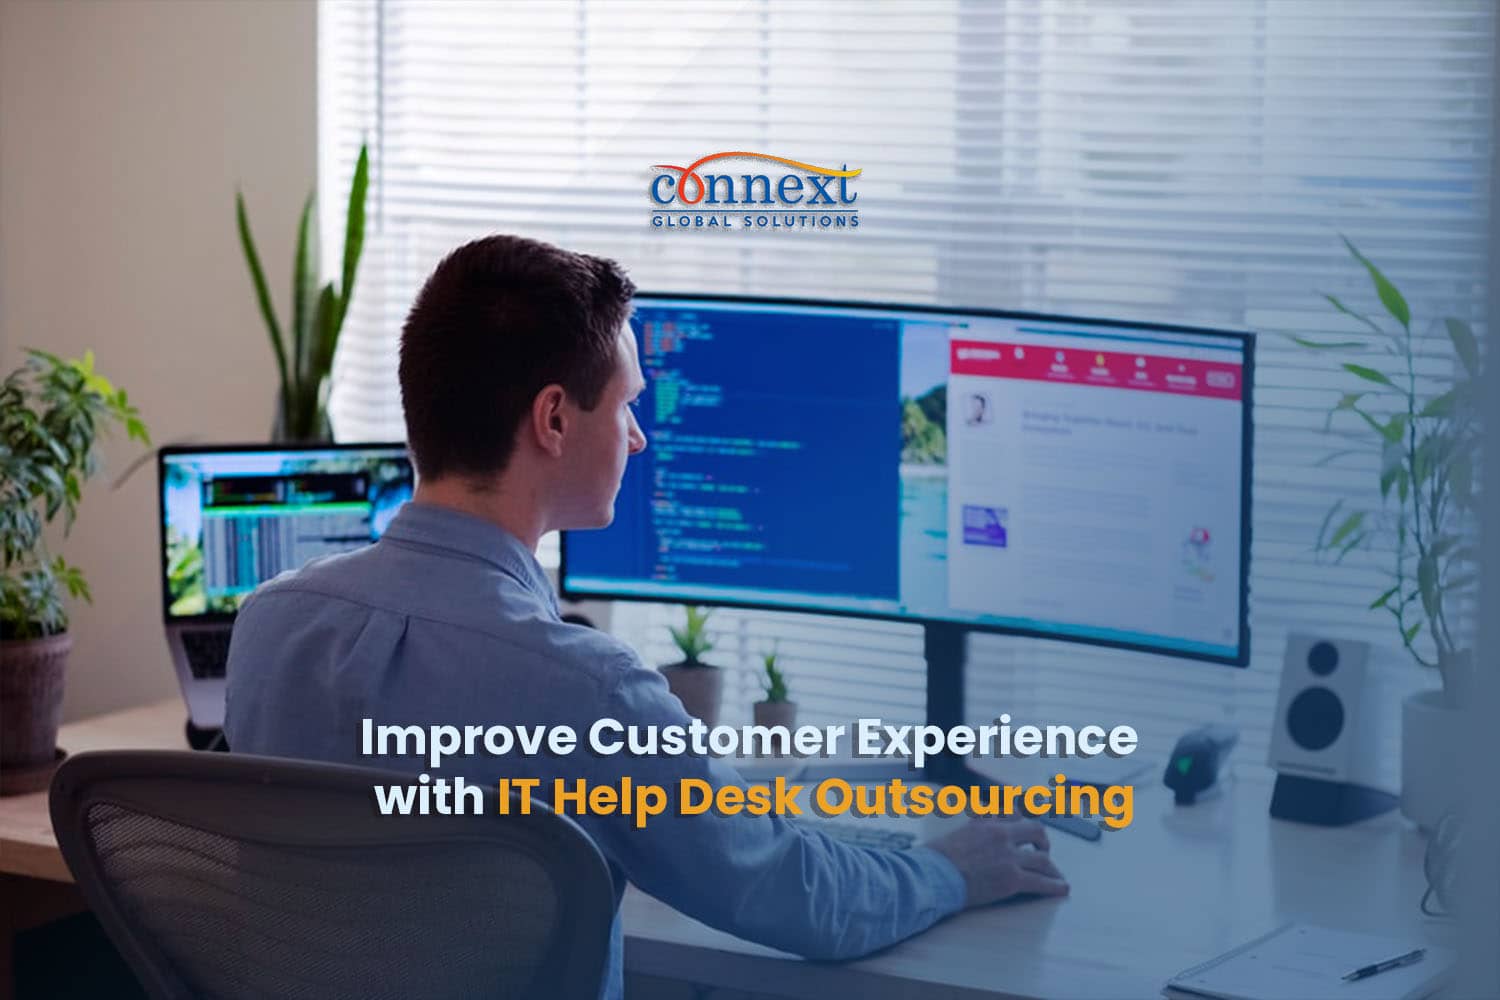 Improve Customer Experience with IT Help Desk Outsourcing